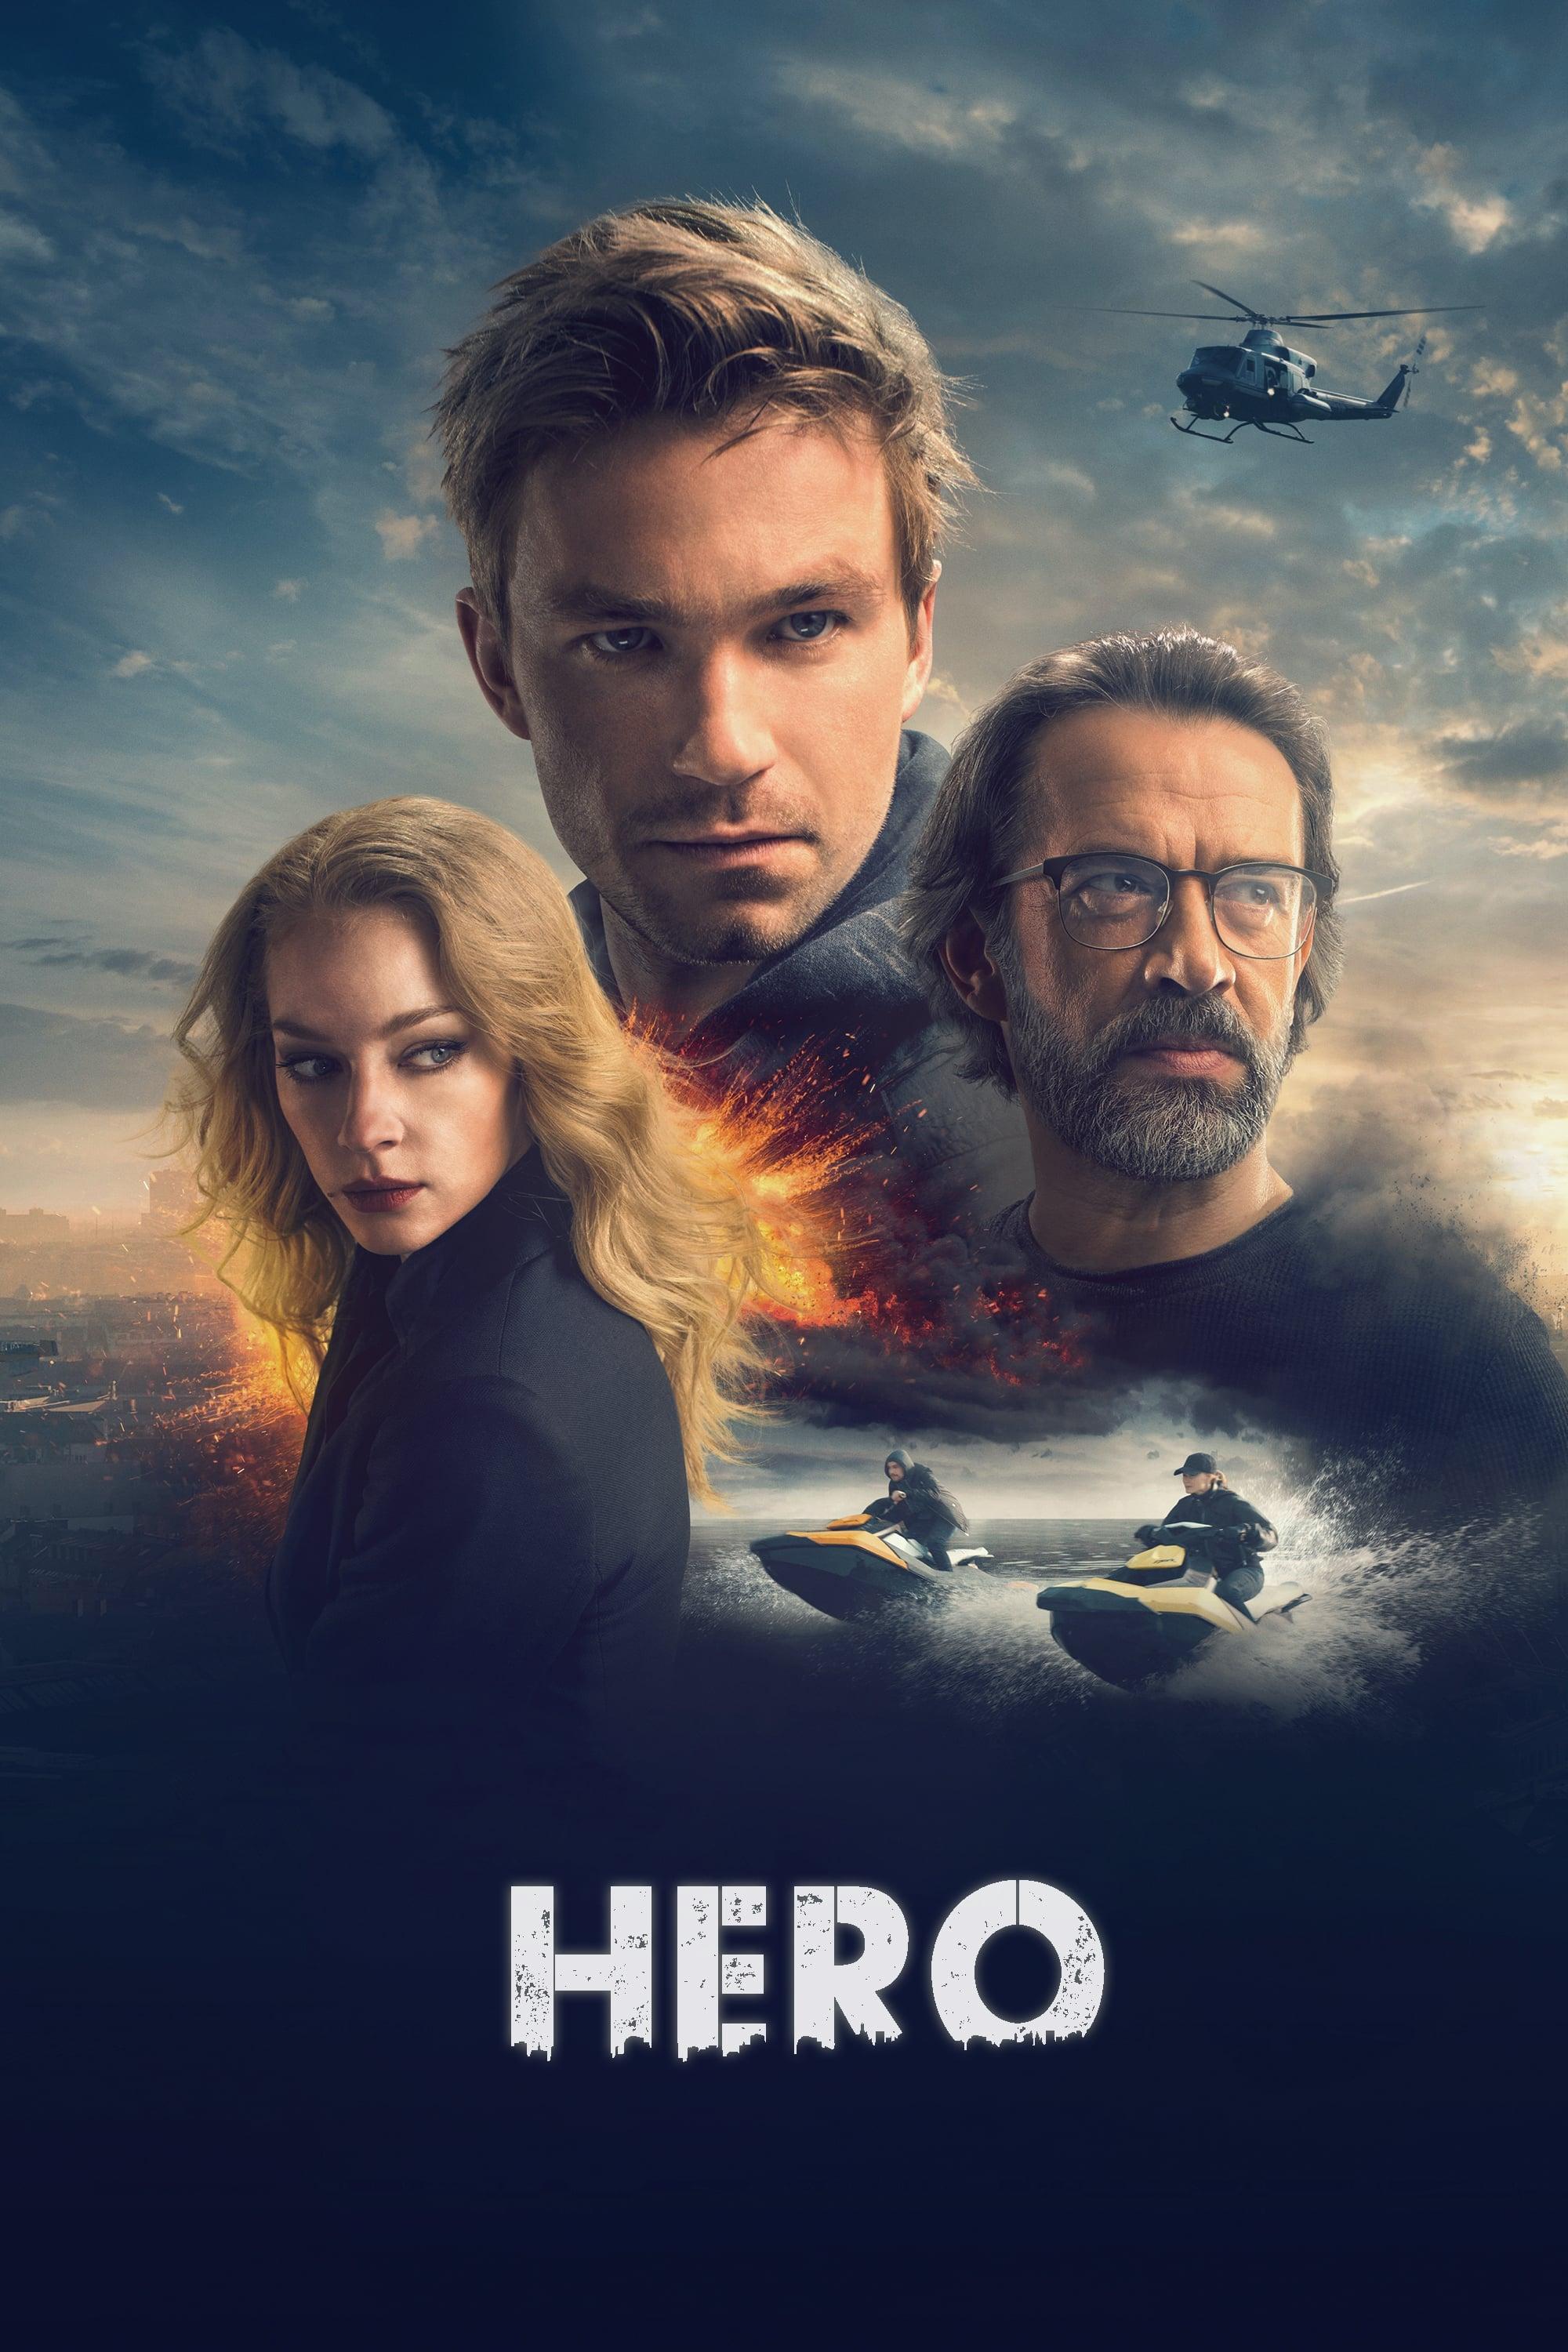 The Hero poster